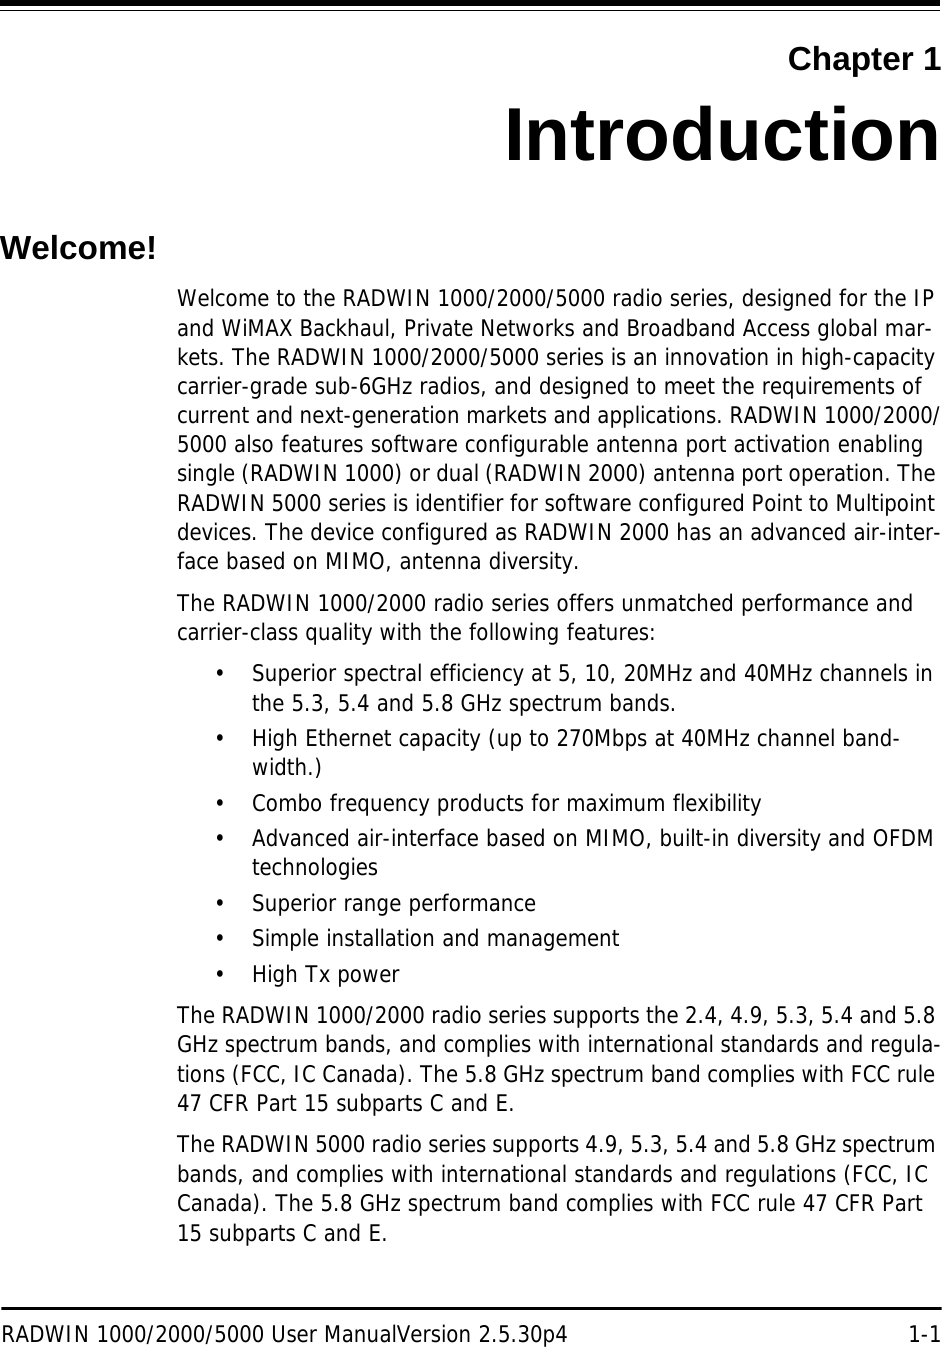 RADWIN 1000/2000/5000 User ManualVersion 2.5.30p4 1-1Chapter 1IntroductionWelcome!Welcome to the RADWIN 1000/2000/5000 radio series, designed for the IP and WiMAX Backhaul, Private Networks and Broadband Access global mar-kets. The RADWIN 1000/2000/5000 series is an innovation in high-capacity carrier-grade sub-6GHz radios, and designed to meet the requirements of current and next-generation markets and applications. RADWIN 1000/2000/5000 also features software configurable antenna port activation enabling single (RADWIN 1000) or dual (RADWIN 2000) antenna port operation. The RADWIN 5000 series is identifier for software configured Point to Multipoint devices. The device configured as RADWIN 2000 has an advanced air-inter-face based on MIMO, antenna diversity.The RADWIN 1000/2000 radio series offers unmatched performance and carrier-class quality with the following features:• Superior spectral efficiency at 5, 10, 20MHz and 40MHz channels in the 5.3, 5.4 and 5.8 GHz spectrum bands.• High Ethernet capacity (up to 270Mbps at 40MHz channel band-width.)• Combo frequency products for maximum flexibility • Advanced air-interface based on MIMO, built-in diversity and OFDM technologies• Superior range performance• Simple installation and management• High Tx powerThe RADWIN 1000/2000 radio series supports the 2.4, 4.9, 5.3, 5.4 and 5.8 GHz spectrum bands, and complies with international standards and regula-tions (FCC, IC Canada). The 5.8 GHz spectrum band complies with FCC rule 47 CFR Part 15 subparts C and E.The RADWIN 5000 radio series supports 4.9, 5.3, 5.4 and 5.8 GHz spectrum bands, and complies with international standards and regulations (FCC, IC Canada). The 5.8 GHz spectrum band complies with FCC rule 47 CFR Part 15 subparts C and E.